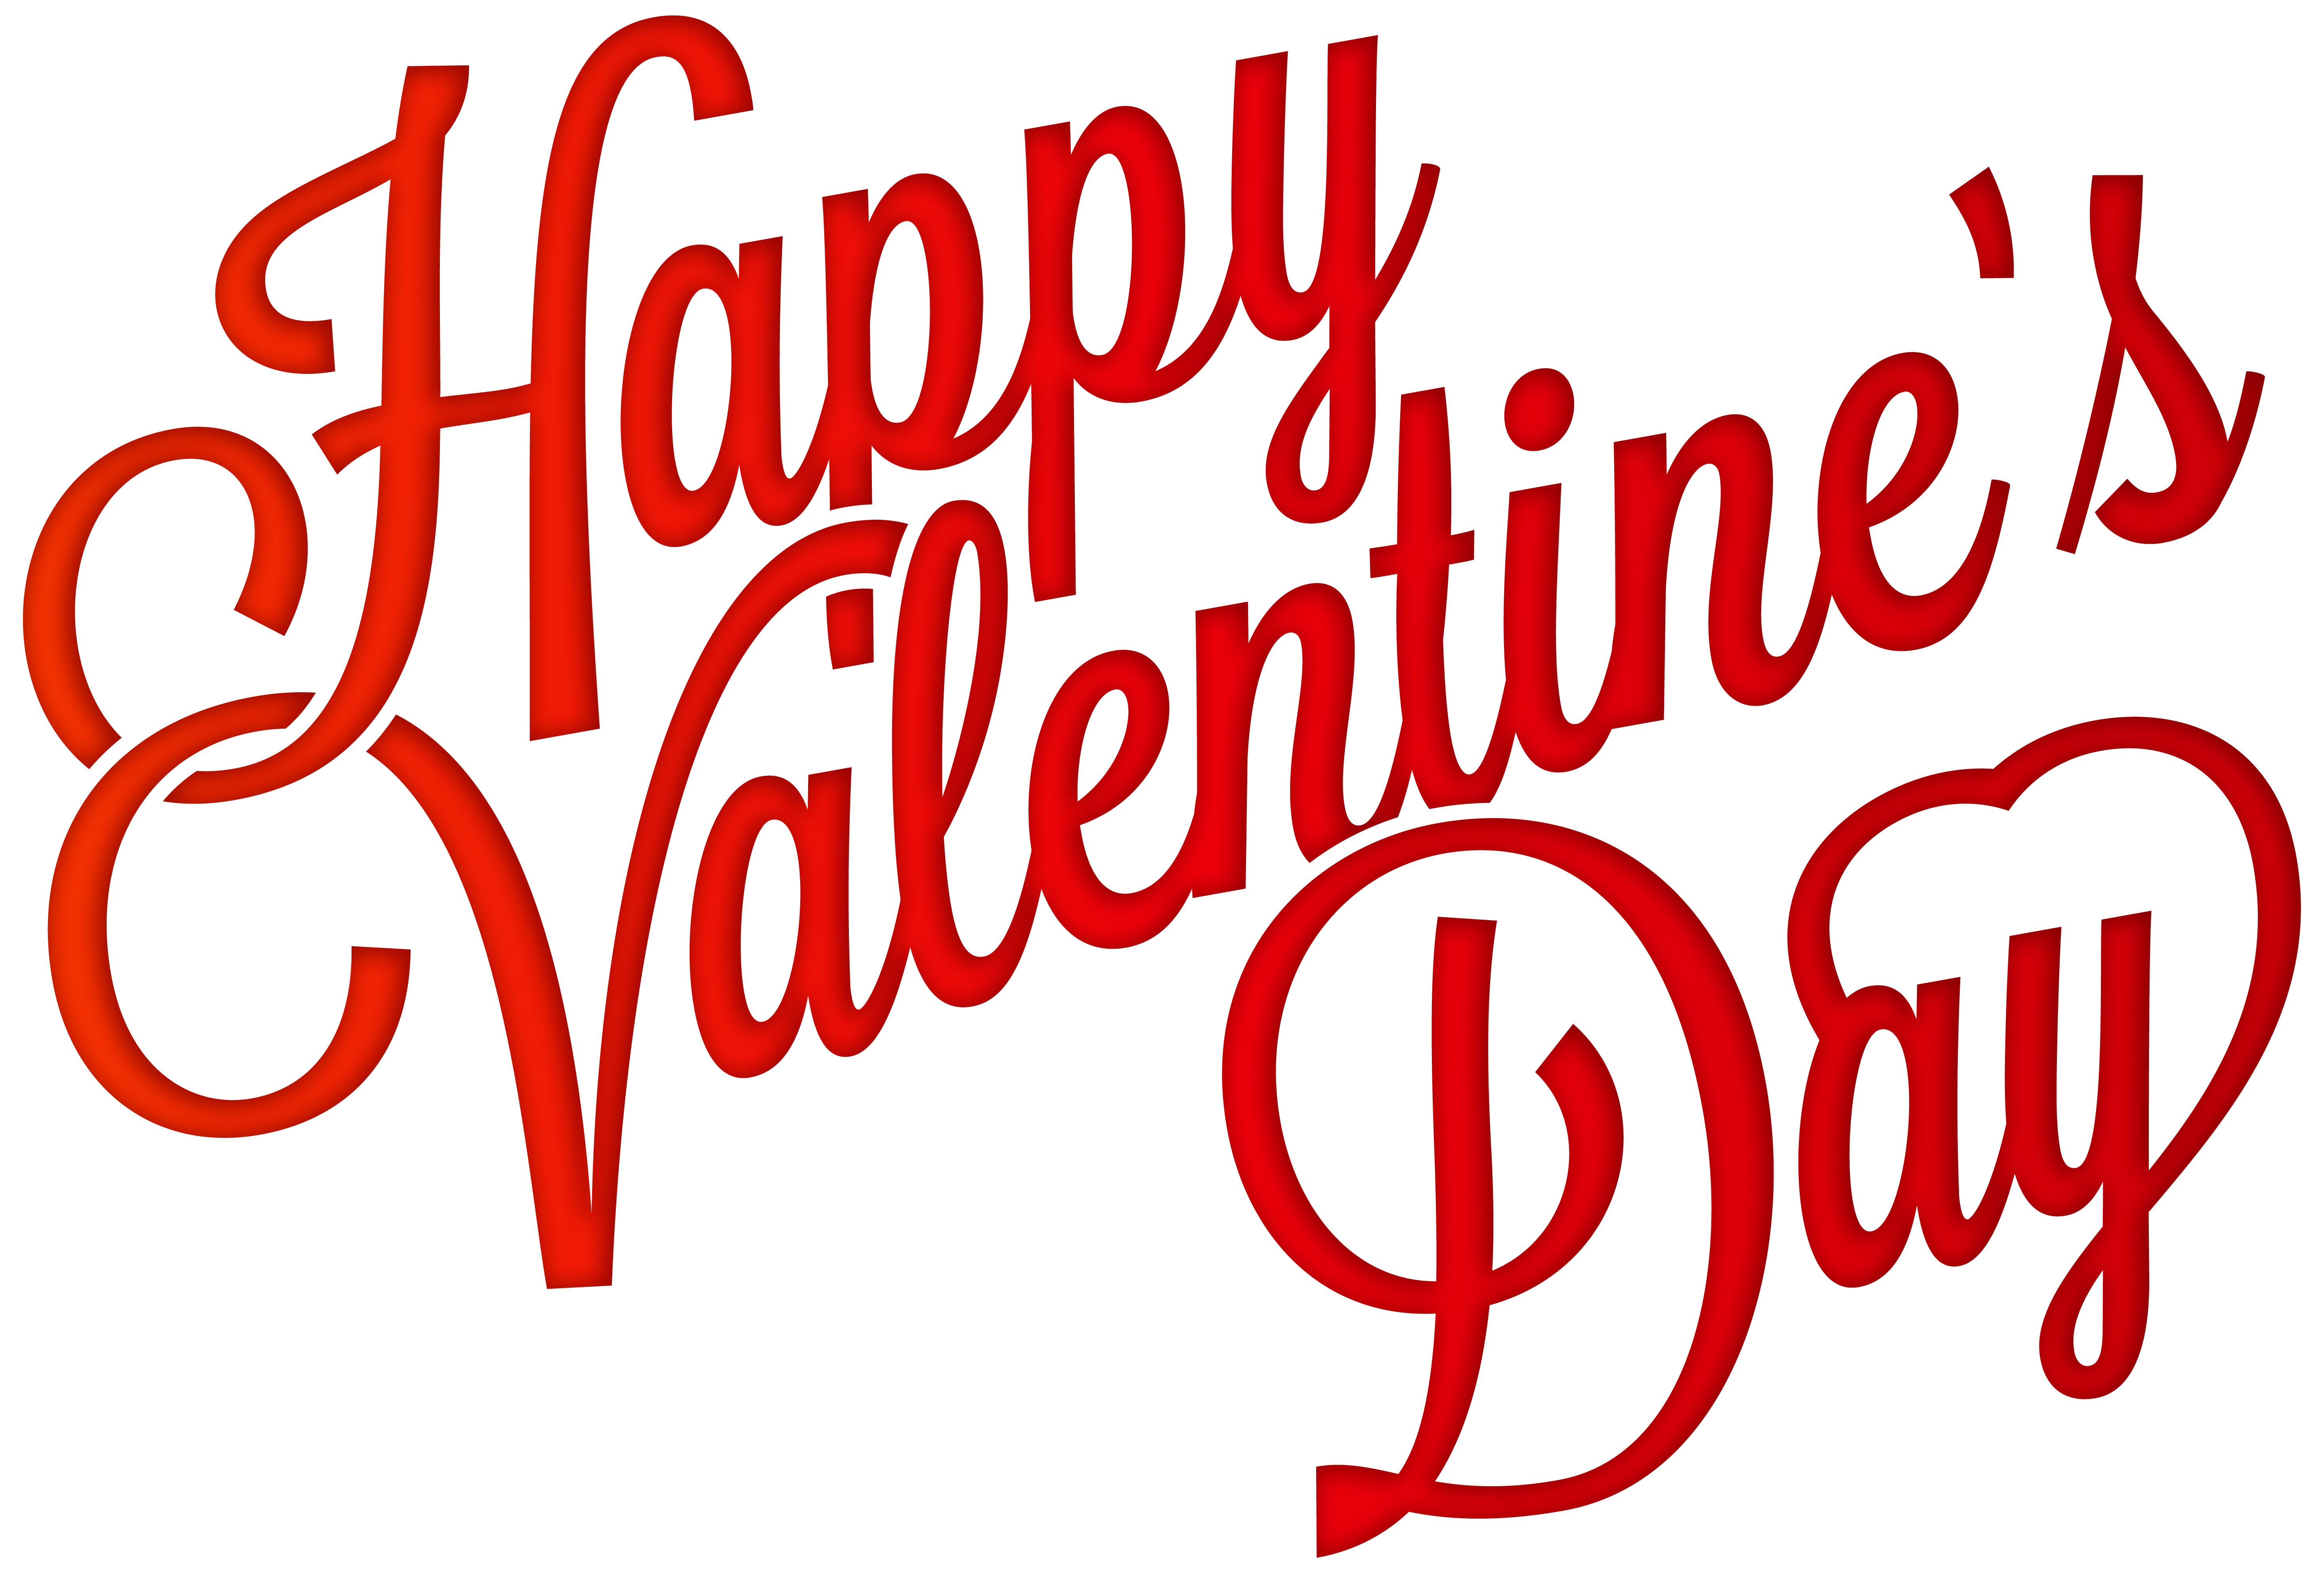 free clipart images valentines day - photo #19